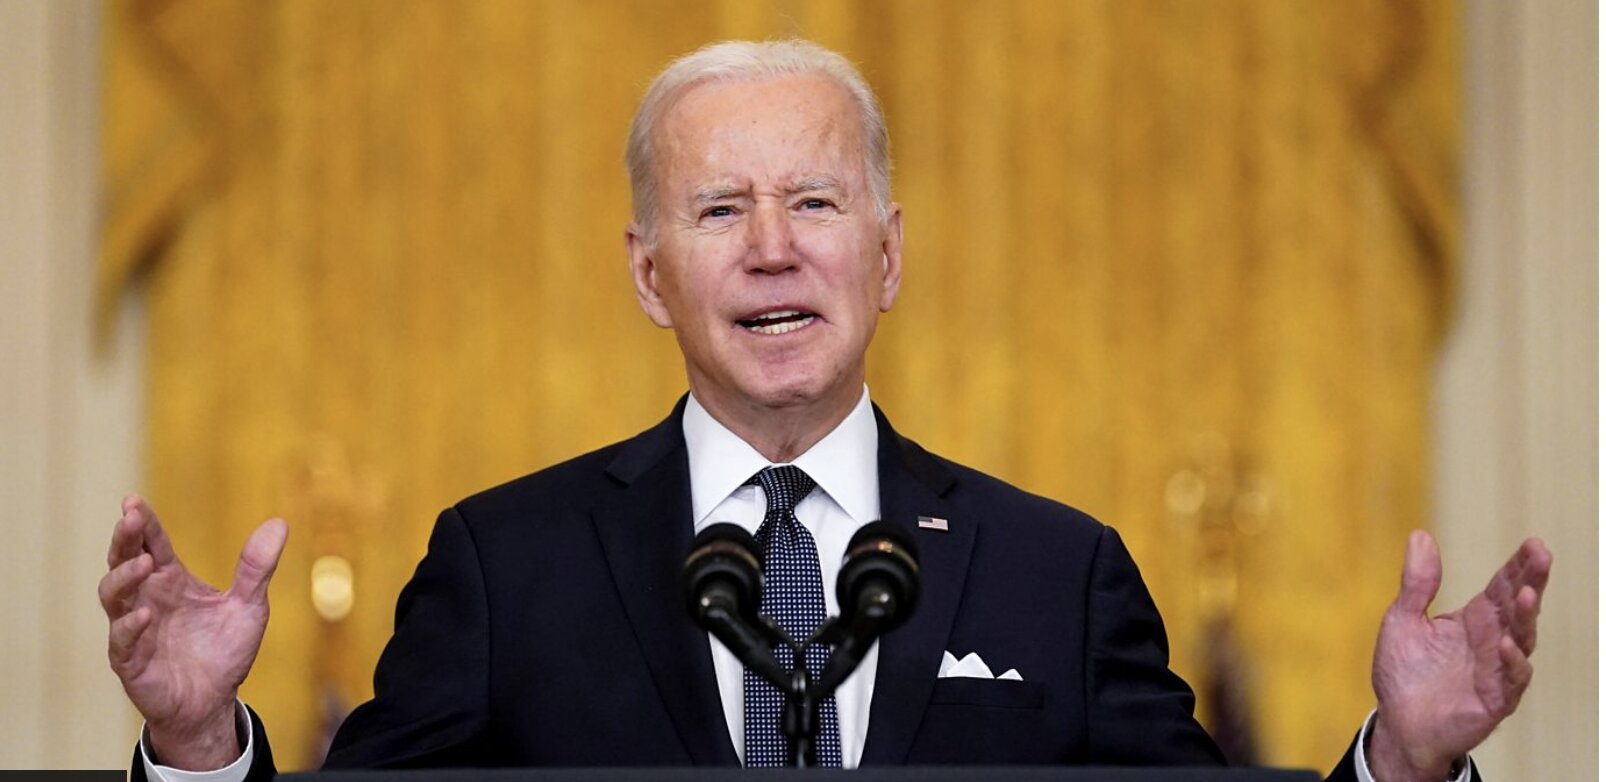 Ukraine crisis: Human cost of Russia attack would be immense – Biden